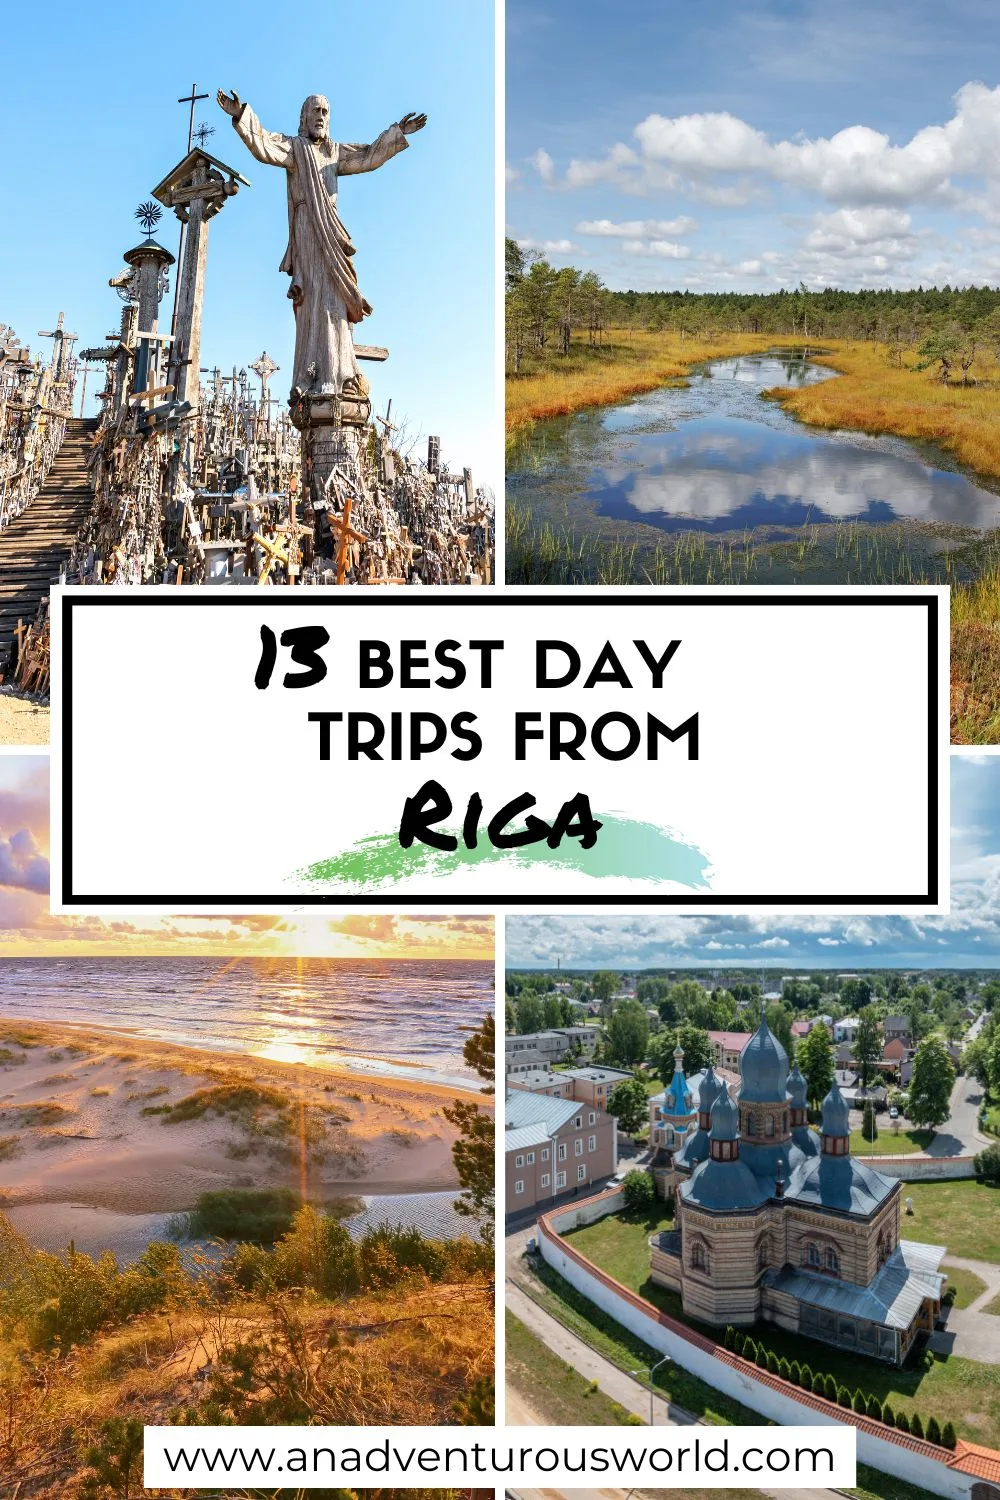 13 BEST Day Trips from Riga, Latvia